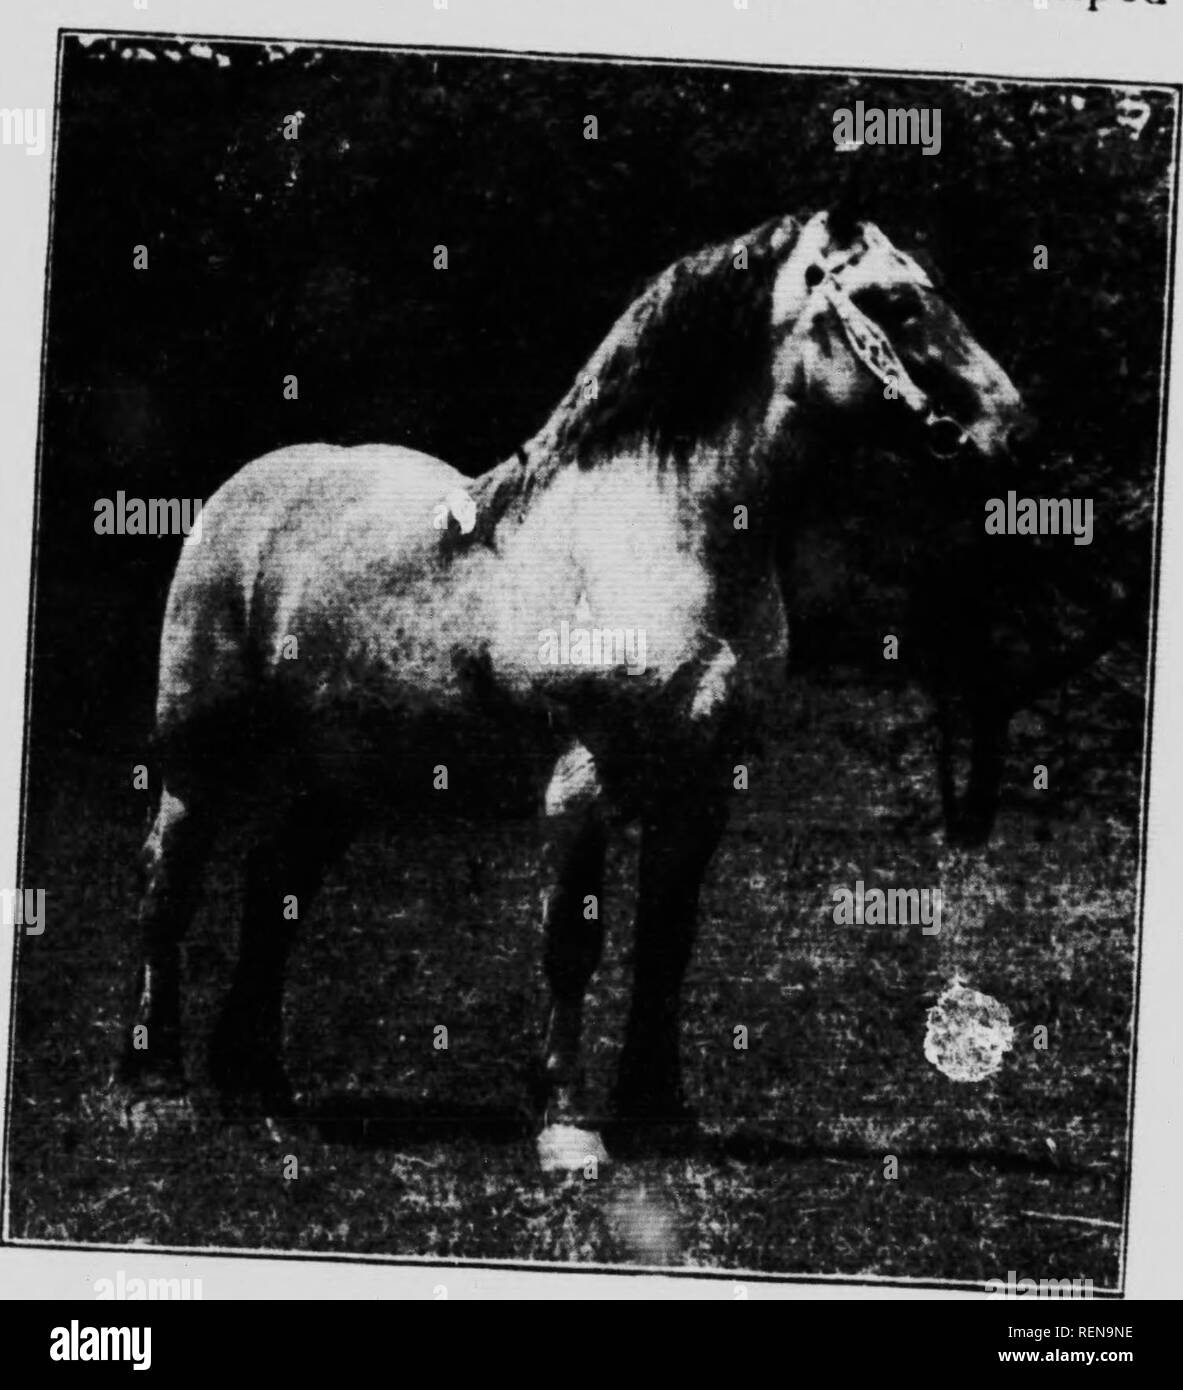 . Studies in horse breeding [microform] : an illustrated treatise on the science and practice of horse breeding. Chevaux; Horses; Horses; Chevaux. 1Â»IK BREEDS ^n&quot;]^^^^^;; '^^^^y -y two ..oples. or even n.en differ, and. whe^n &quot;,; ^ S&quot; theTe&quot;&quot;?&quot; f &quot;'&quot;^- ^^'-&quot; &quot;&quot;&quot;g &quot;s people of .oâ,/â..ns {.Jr'tL: ^^nihe'^^ir;?.;;i;-.^^- rnakin*g uifth^^^lfn^c'ln'^luS^^^^^^^^^^ ^I^^ -O&quot; small territory â n the .or,. BiauJe^^ri-^^f^lirSl^ ^^^^. rss,X-â':t&quot; fnTu:c1h?;'^'&quot;Â°^â &quot;^ ^^ '^^-â¢&gt;' -^^ at breeds. His compact forTiwi Stock Photo